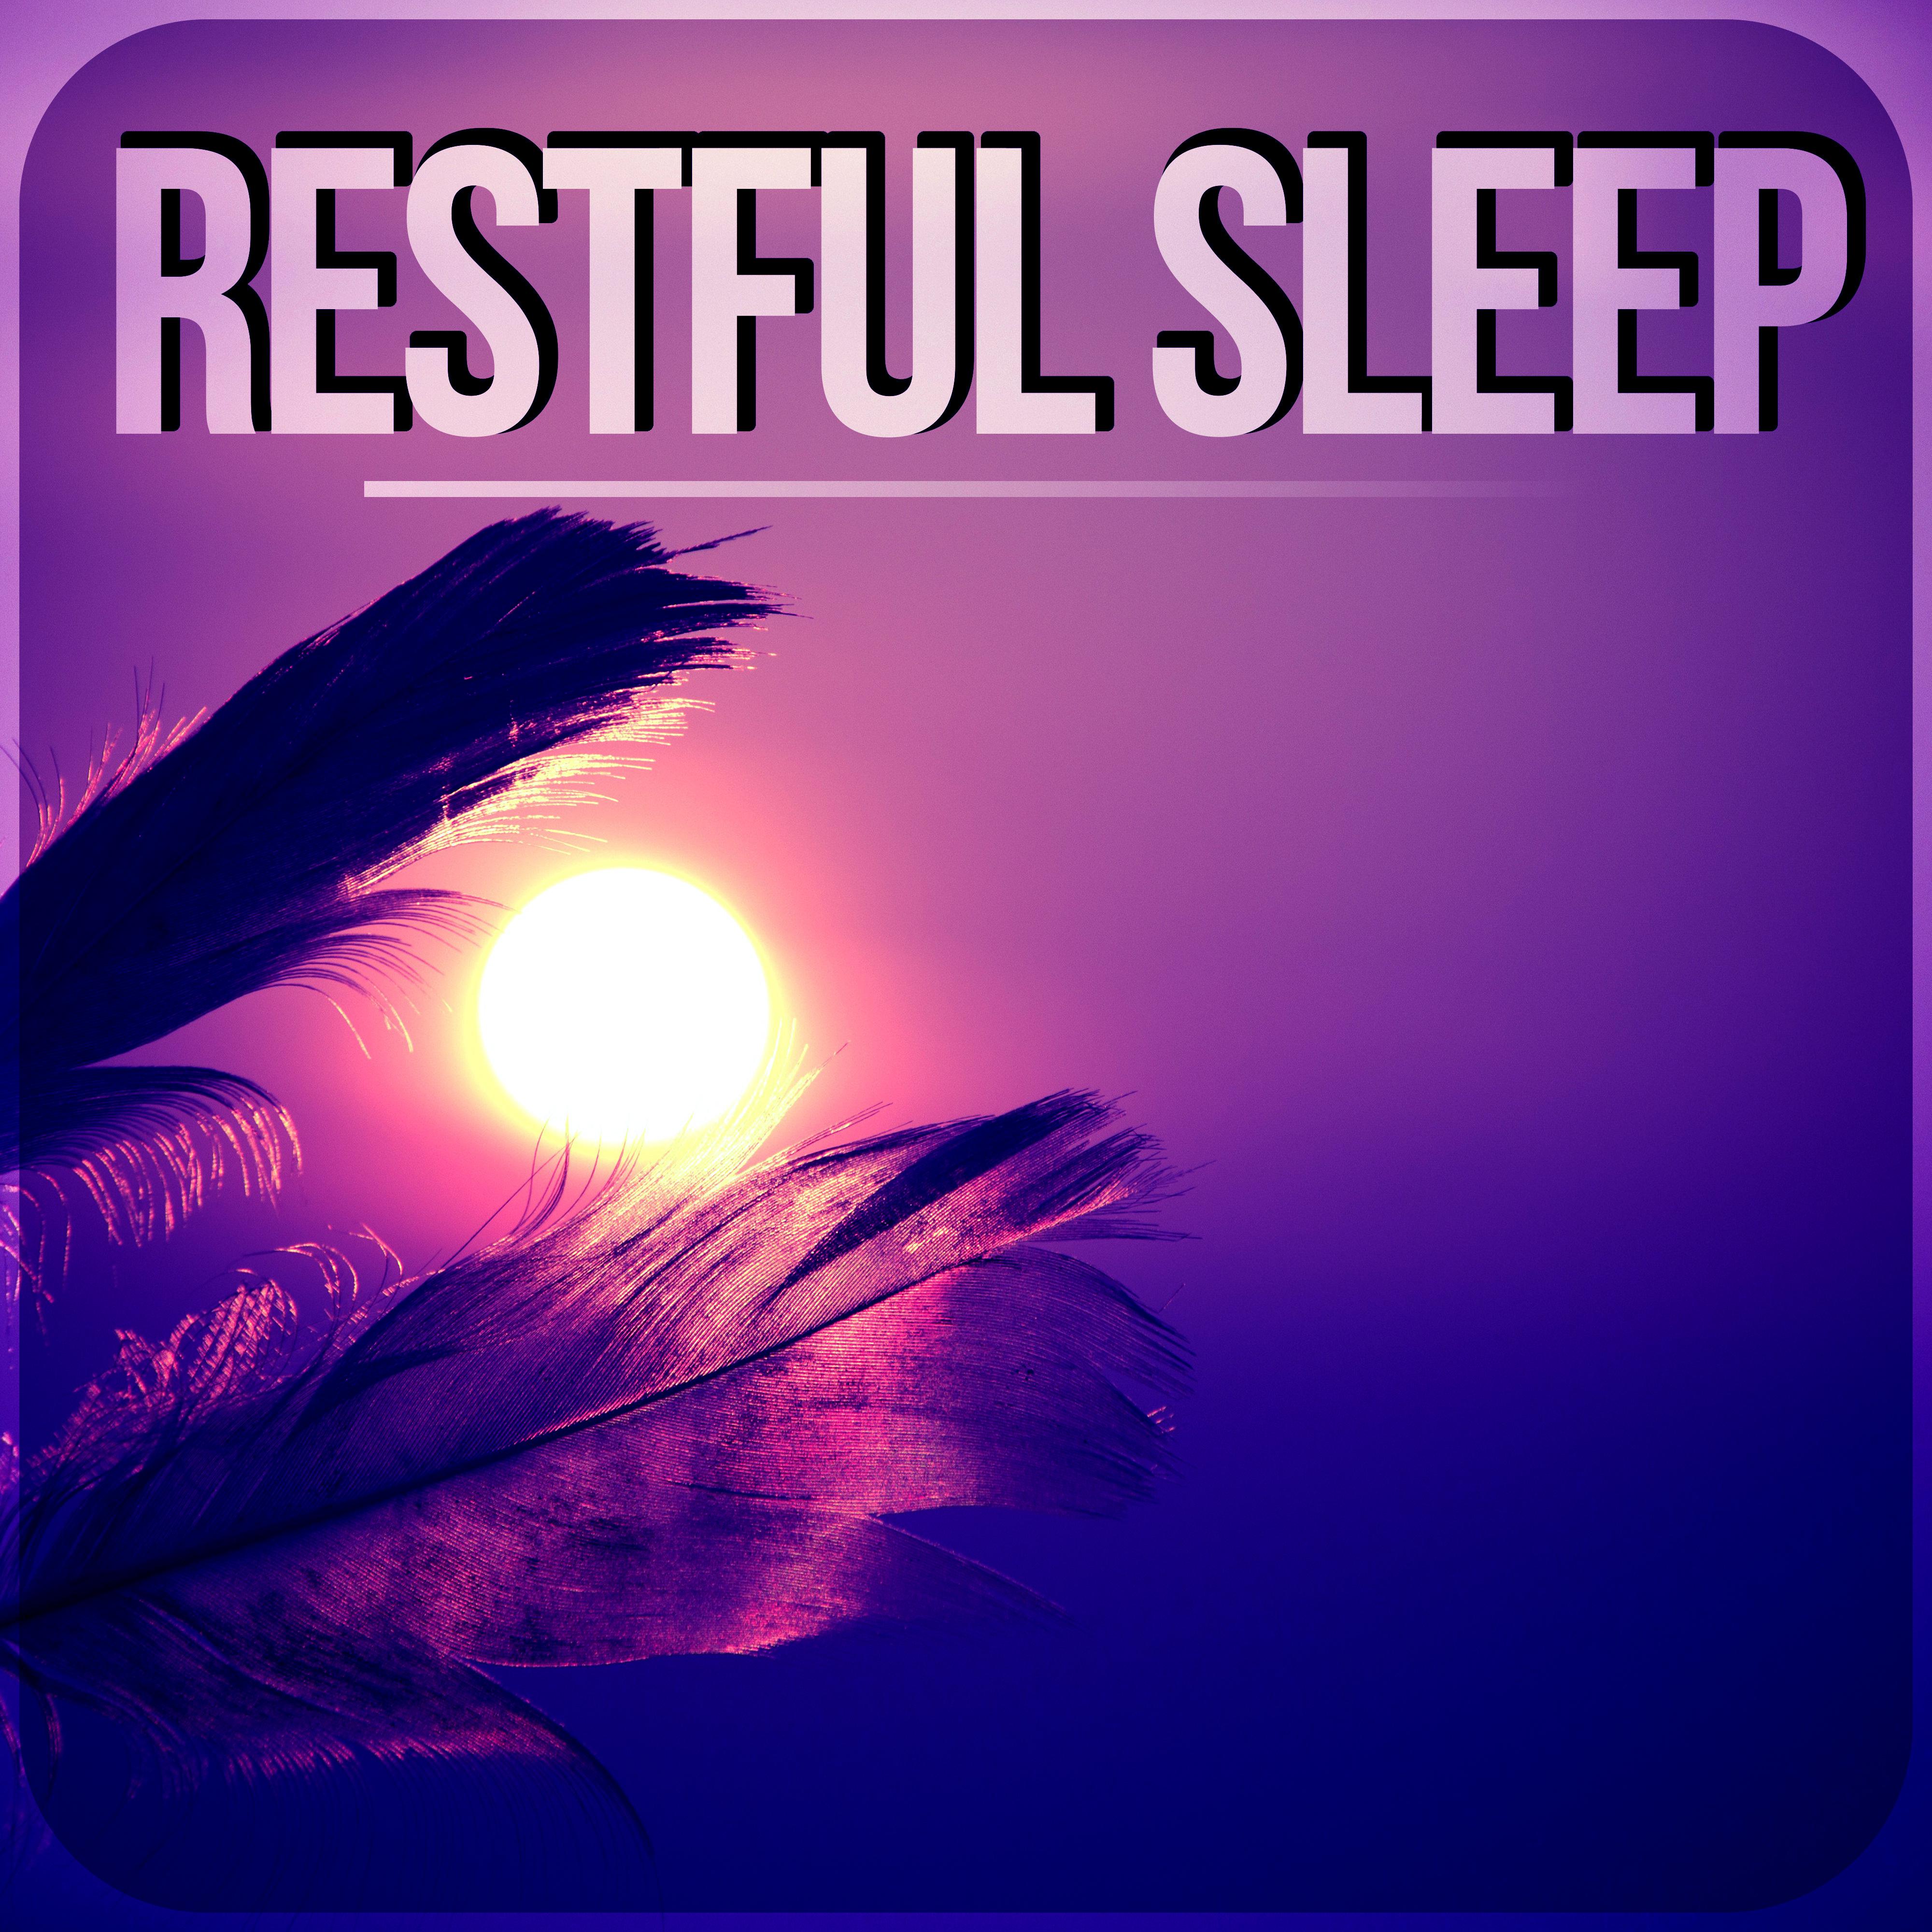 Restful Sleep - Sleep Music to Help You Relax all Night, Instrumental Music for Massage Therapy, Yoga Music